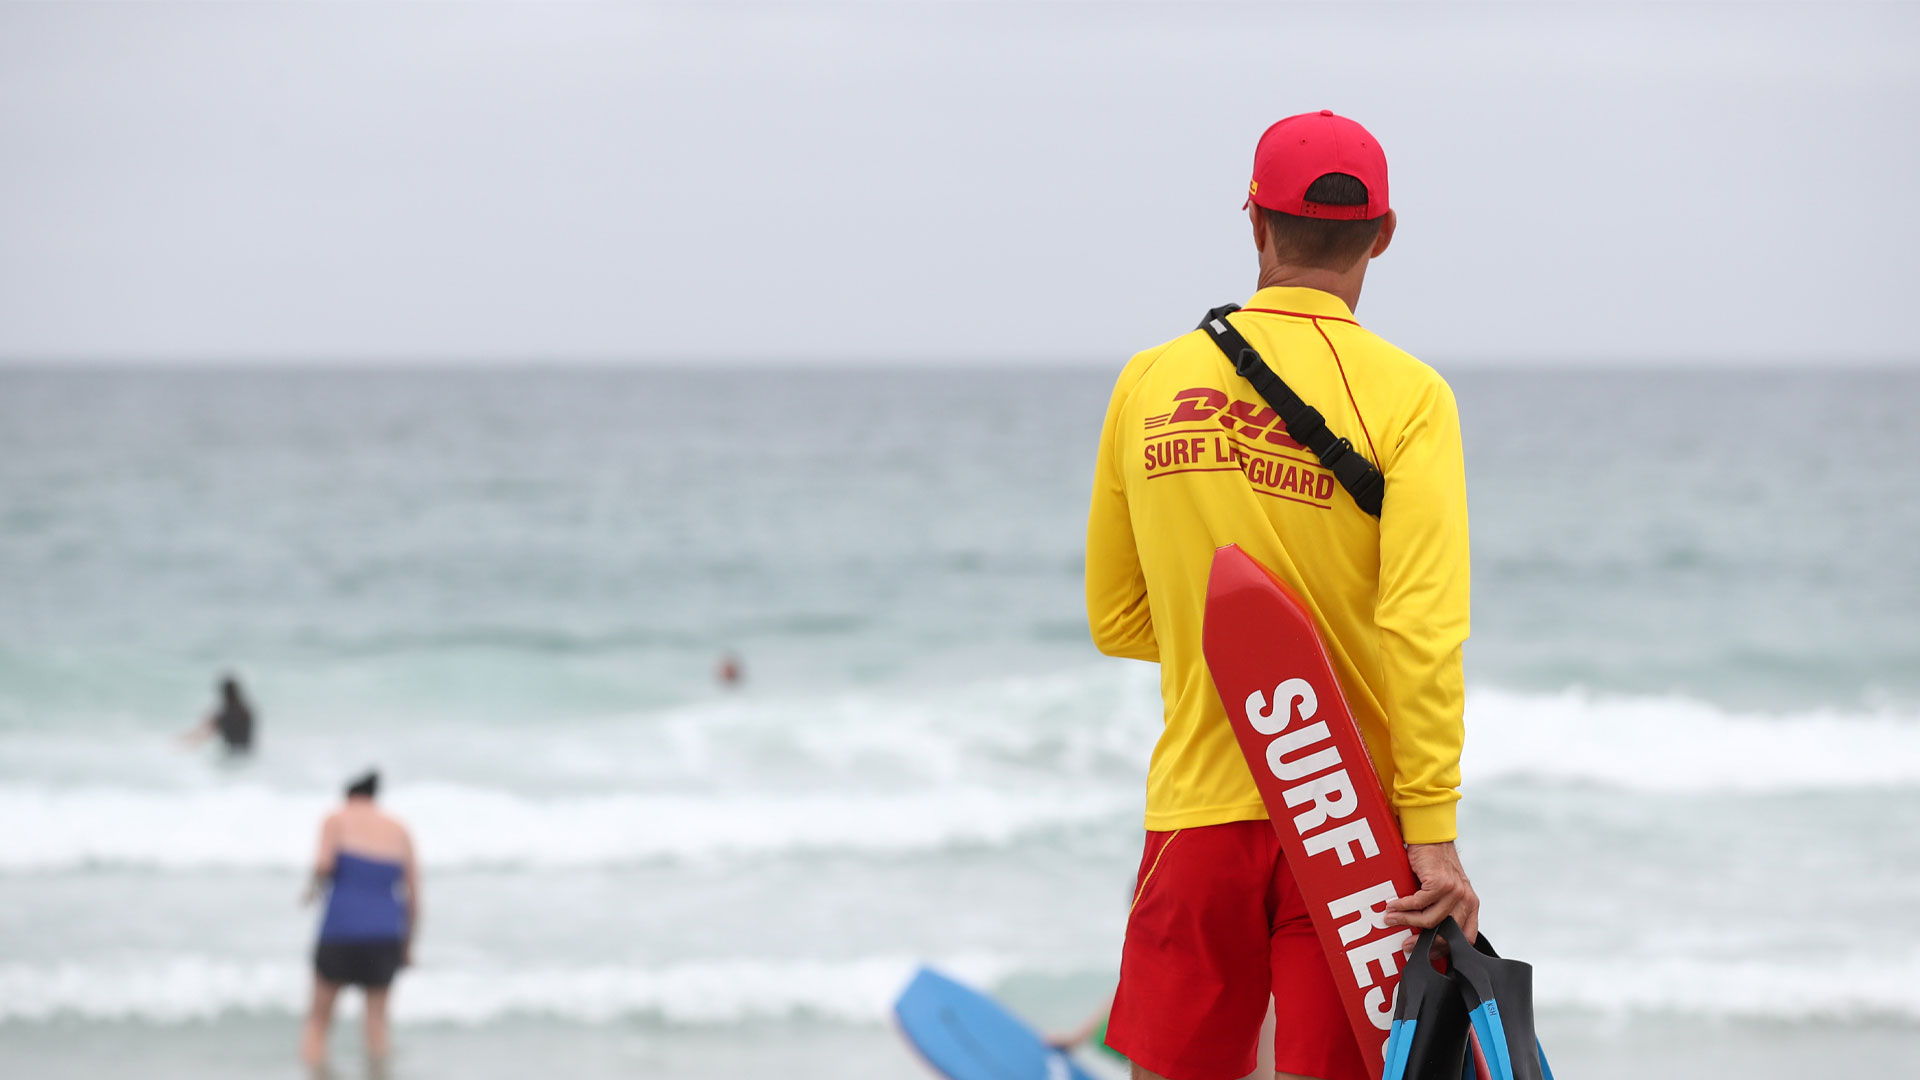 Surf lifeguard looking out over the ocean on a New Zealand beach.